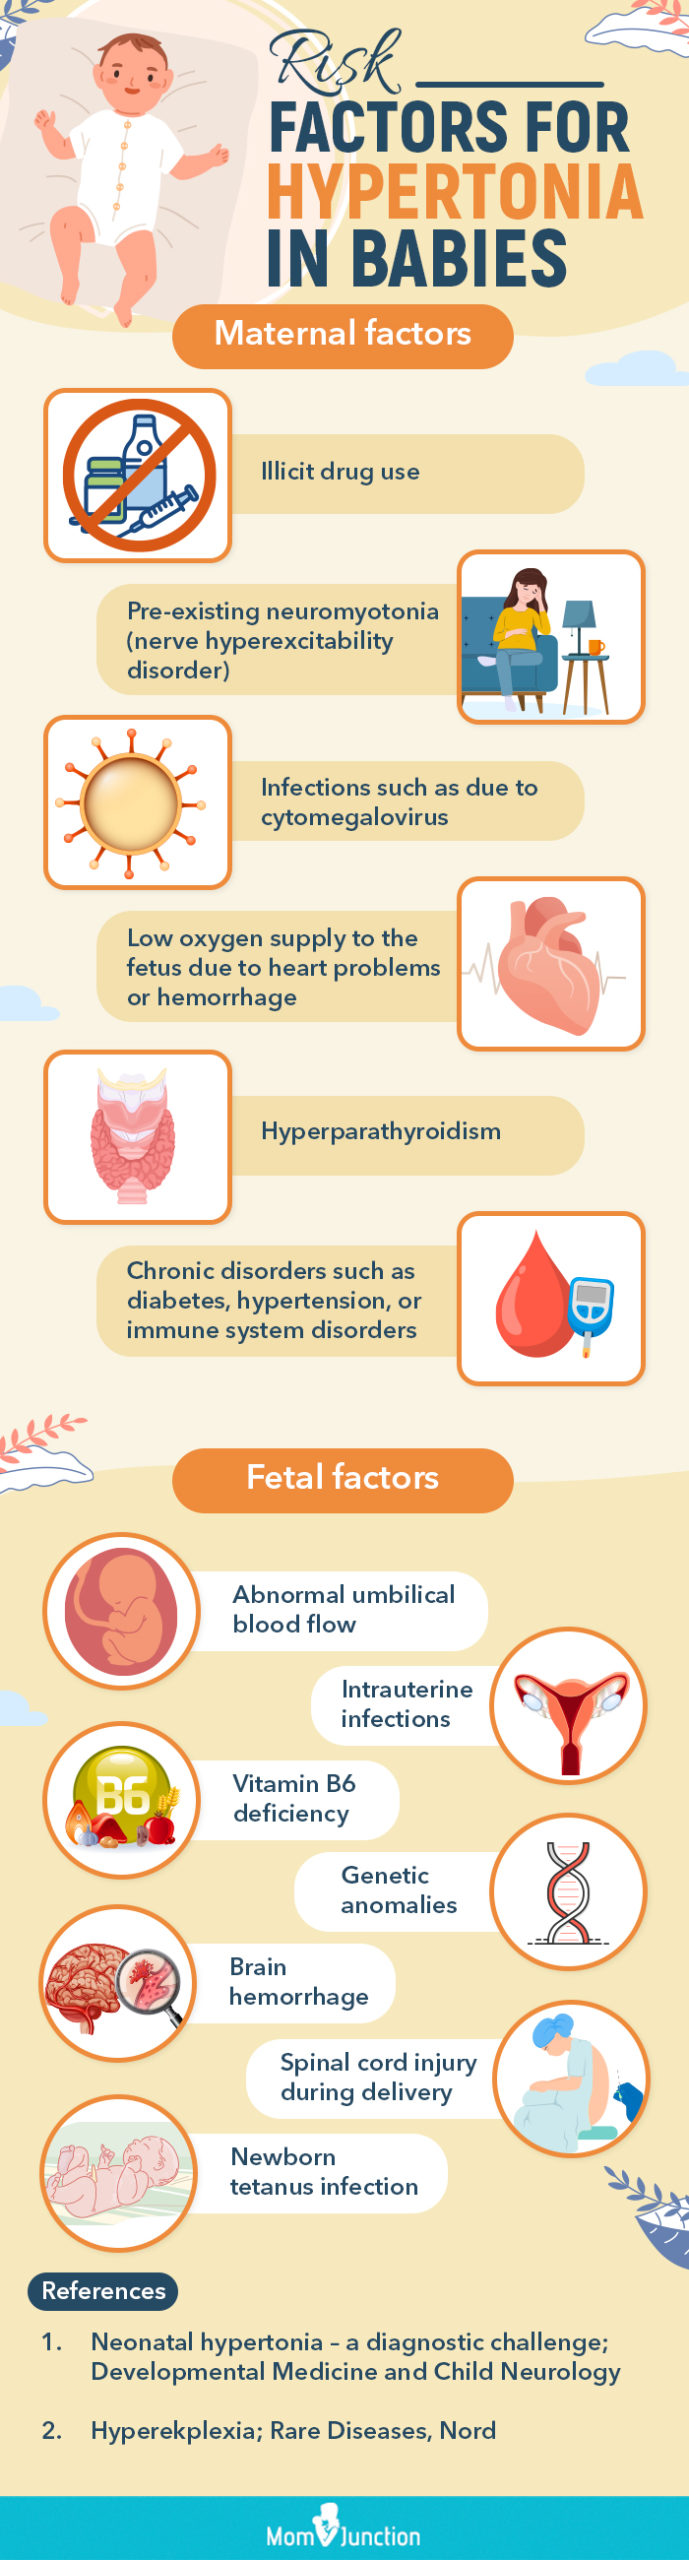 risk factors for hypertonia in babies [infographic]